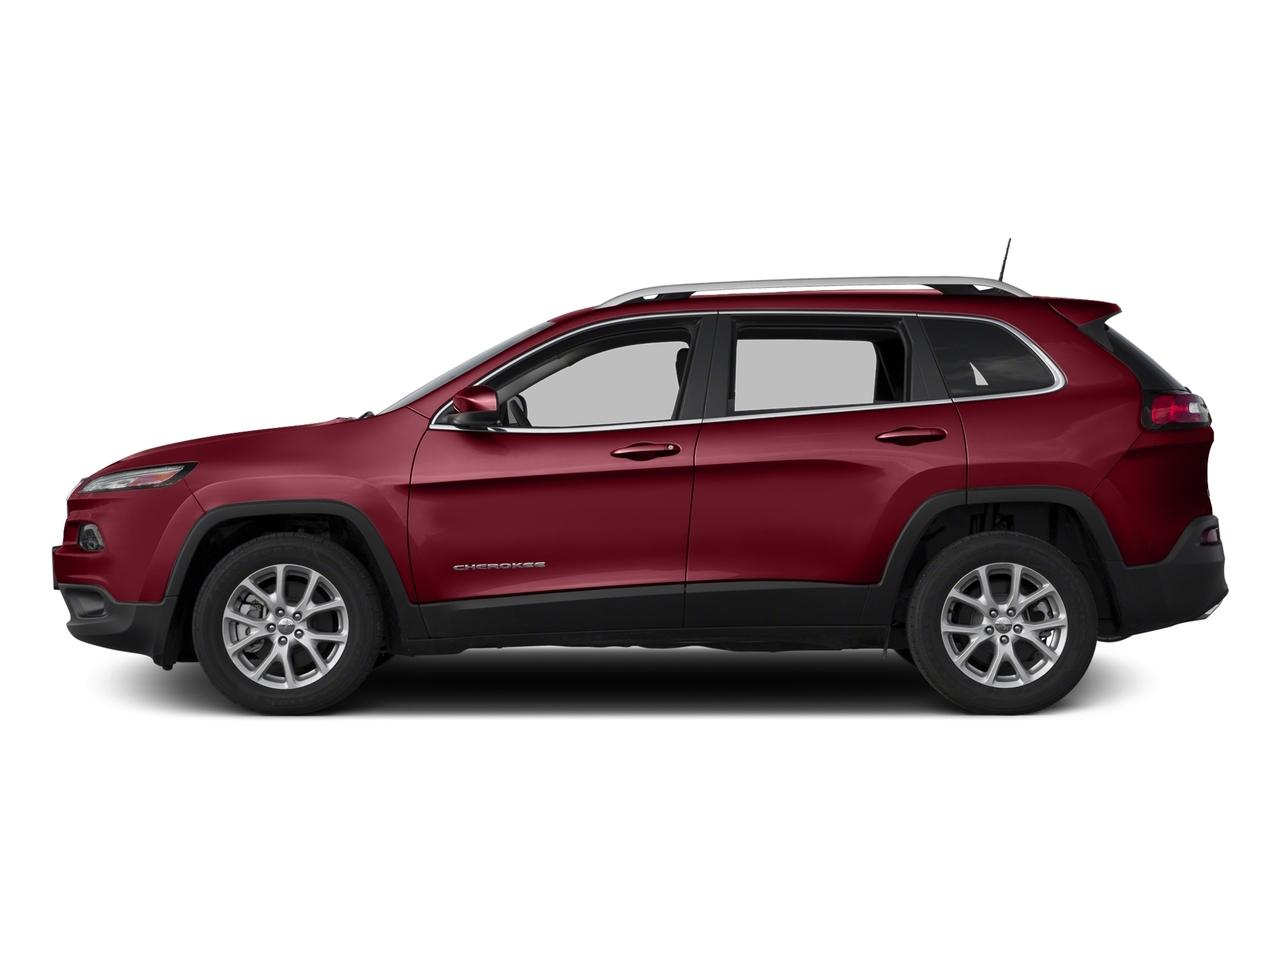 Used 2016 Jeep Cherokee Latitude with VIN 1C4PJMCS7GW283309 for sale in Grand Rapids, Minnesota